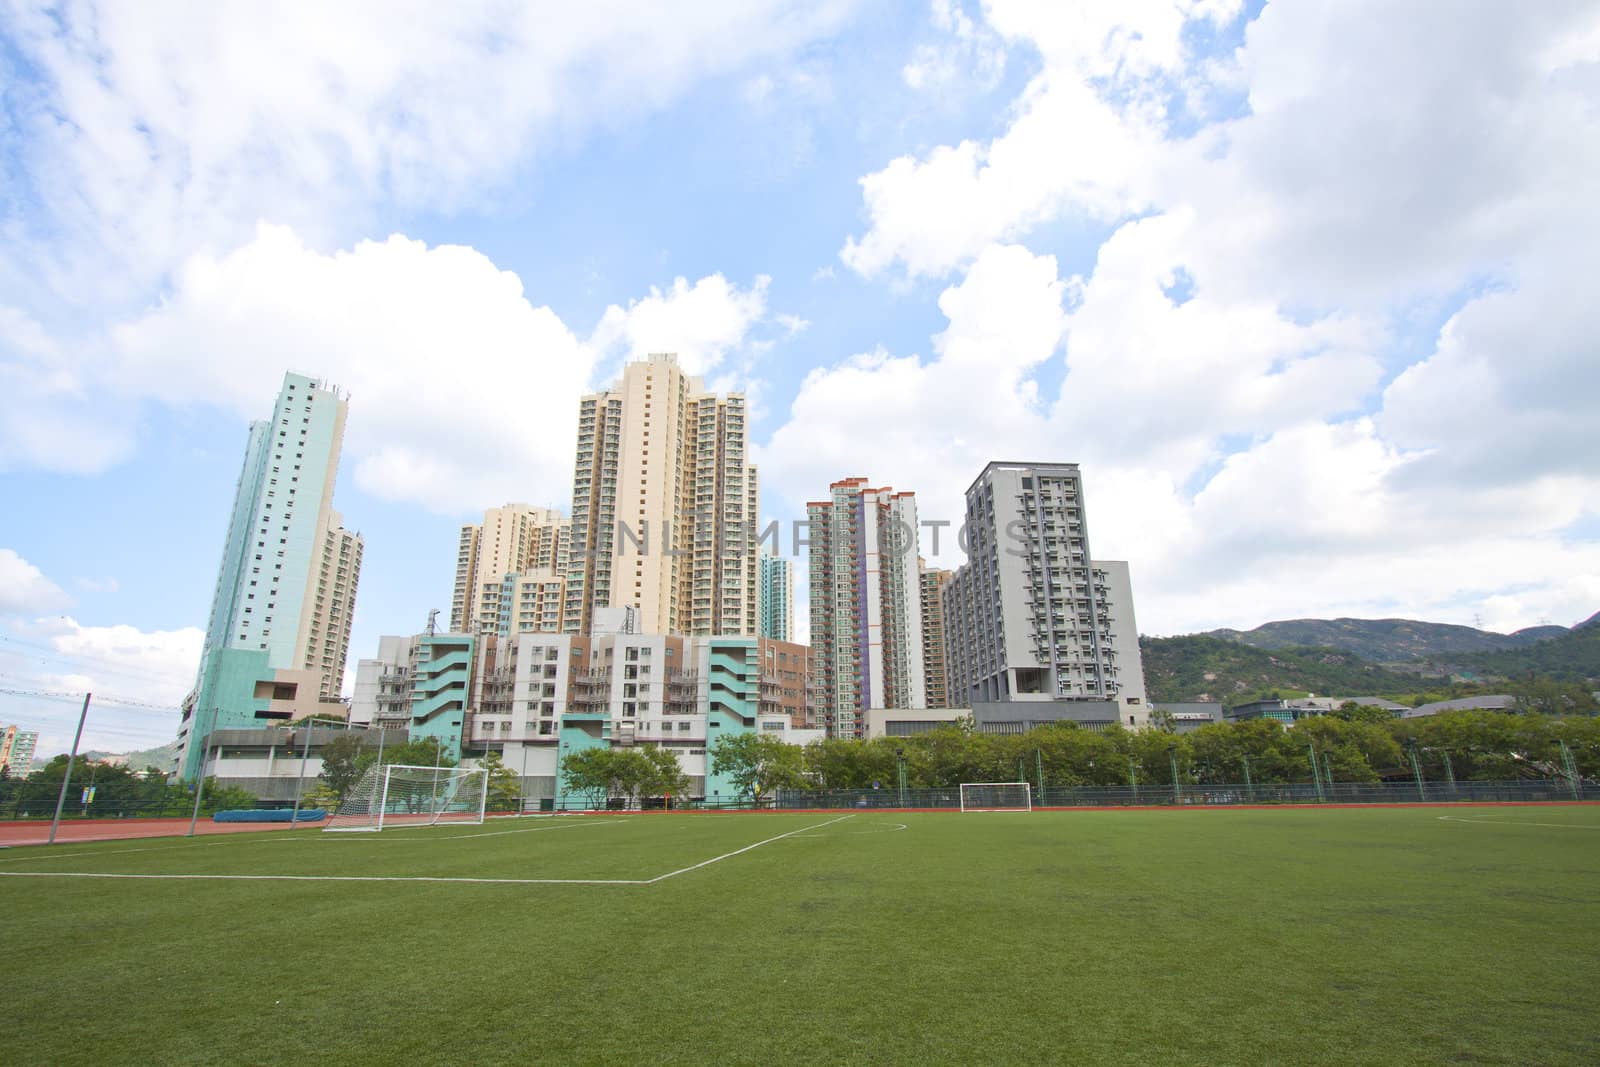 Hong Kong downtown with residential buildings and sports court by kawing921